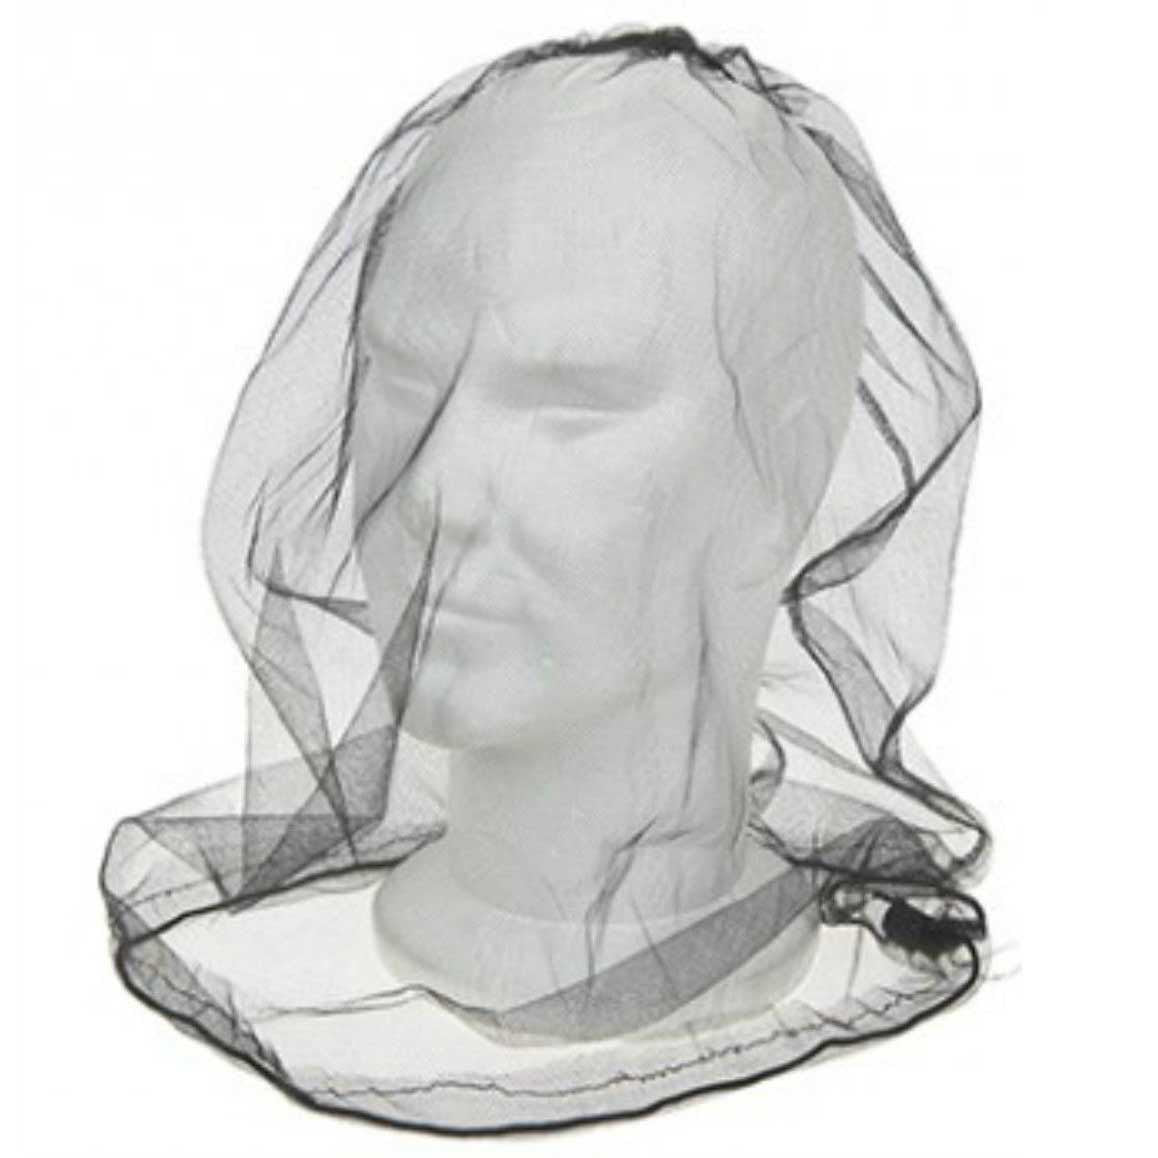 Protective Mosquito Mesh Head Net For Travel And Camping